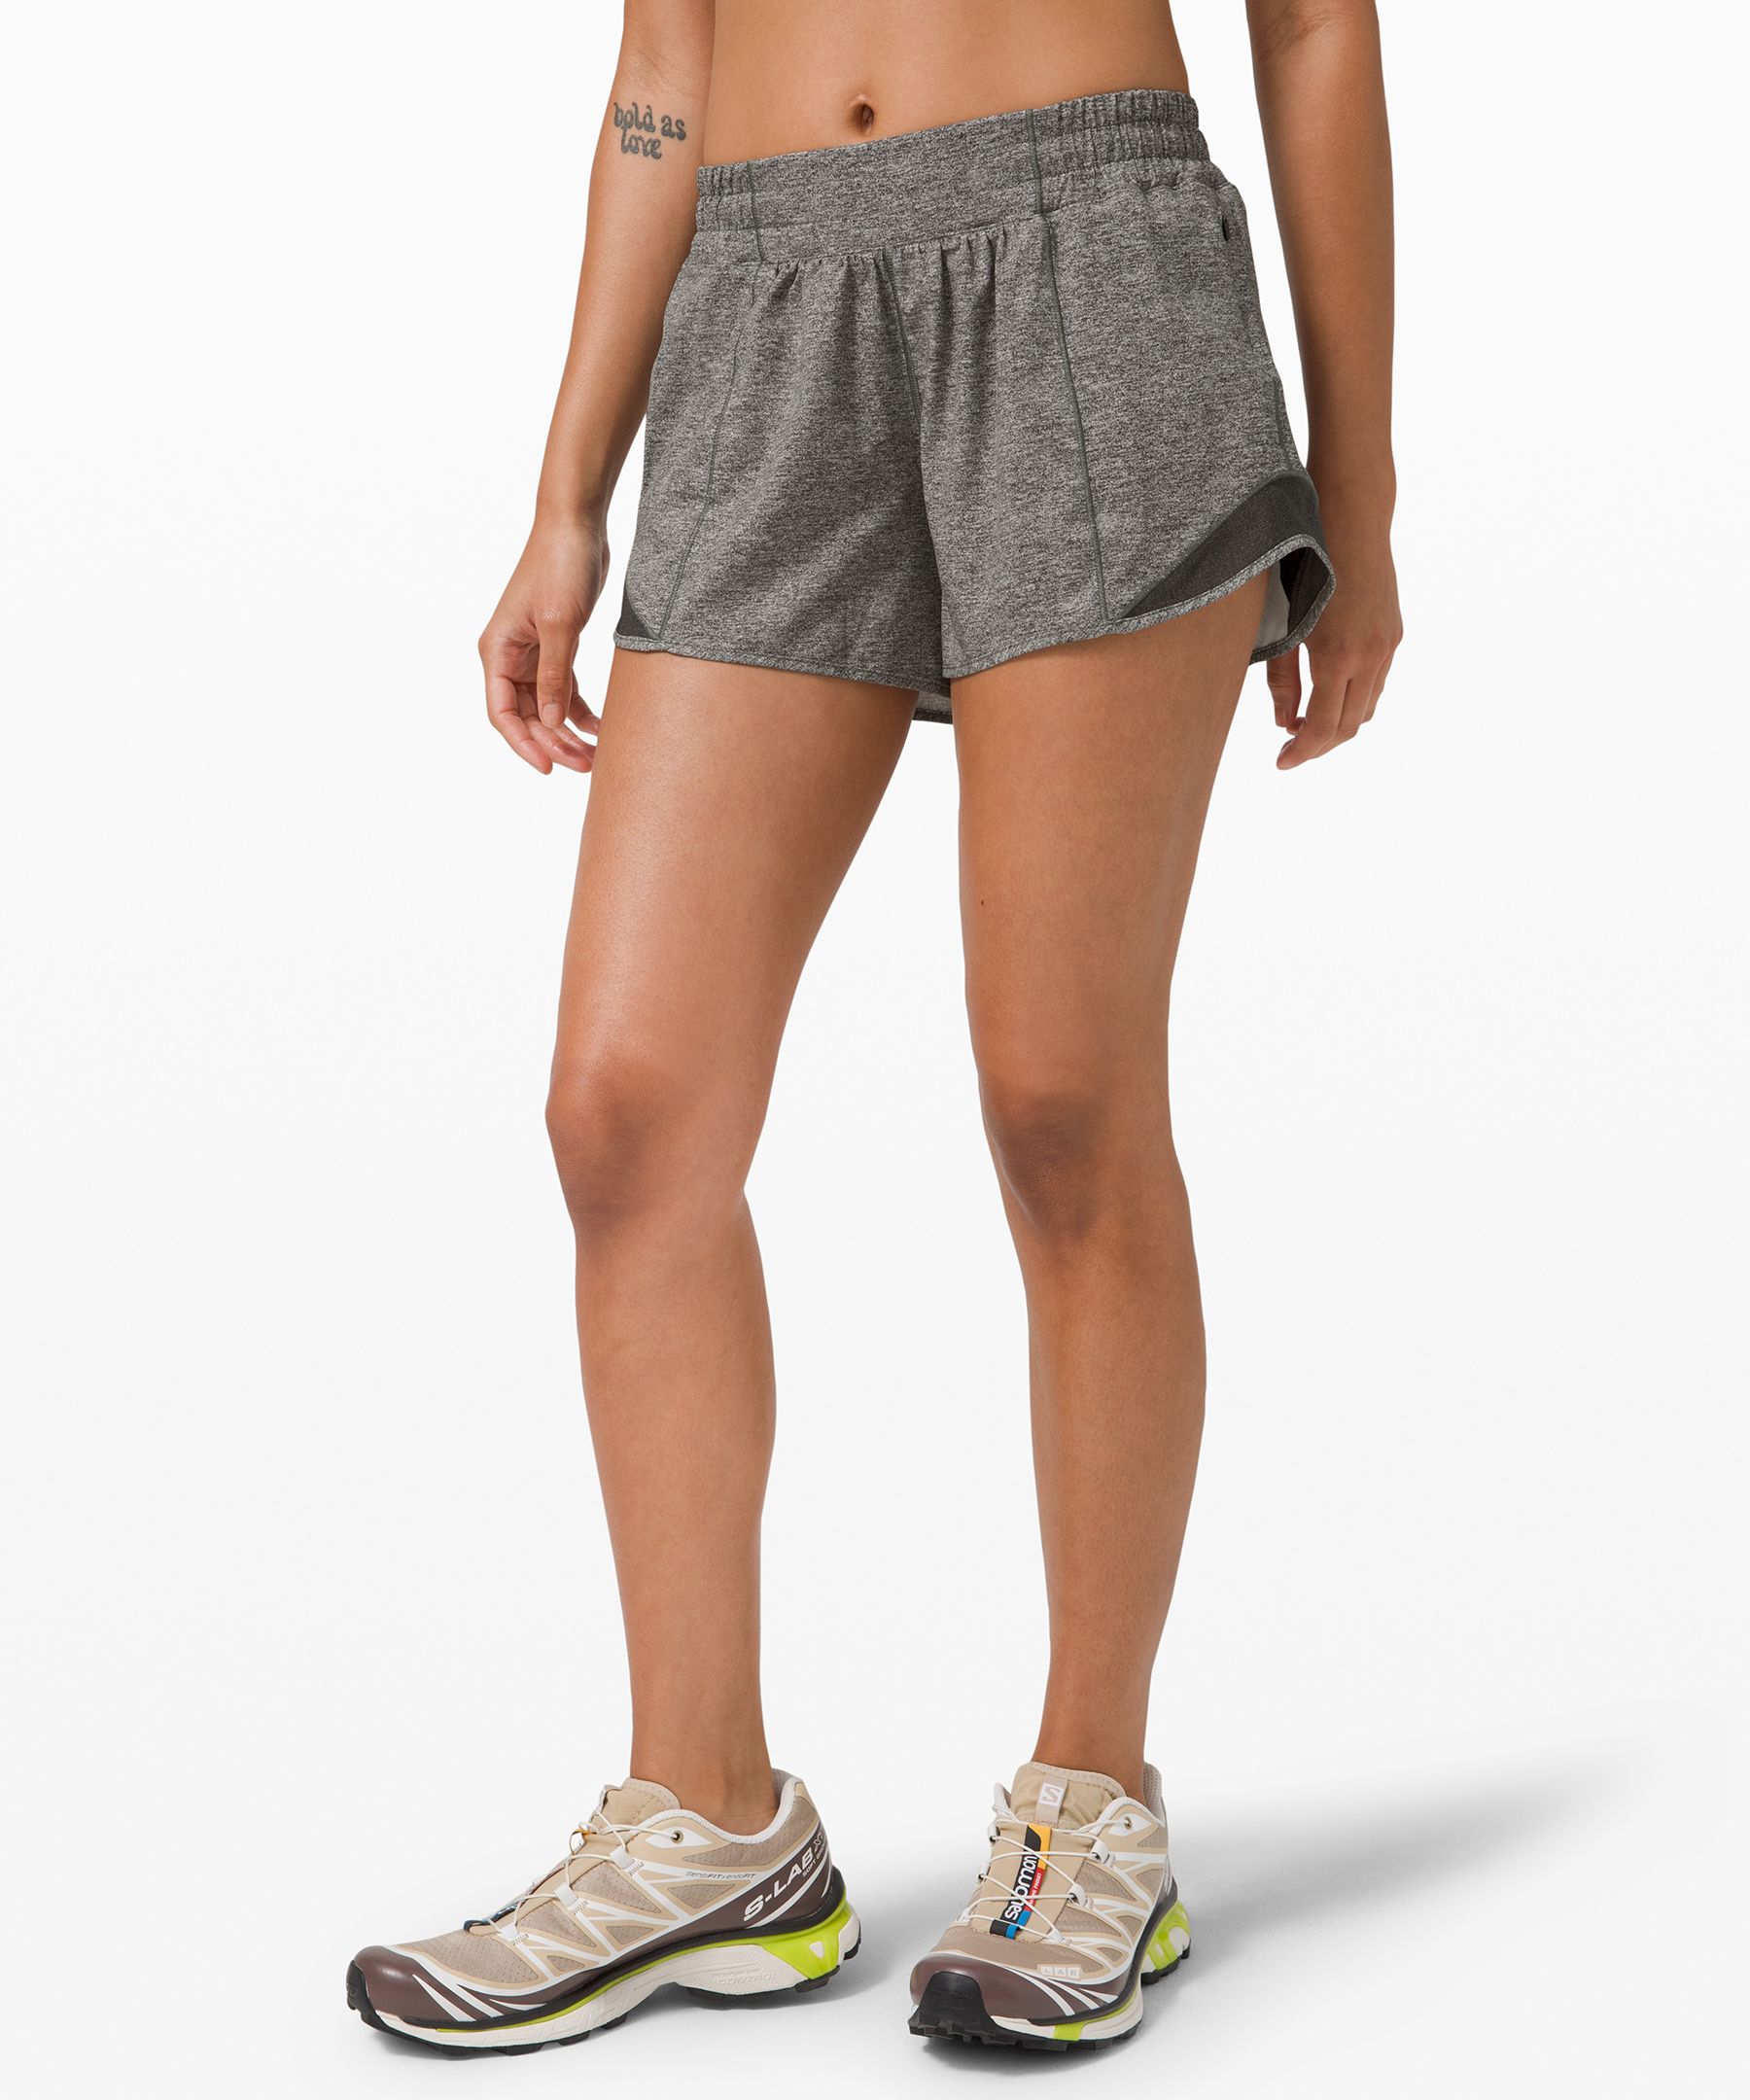 Lululemon Hotty Hot Low-rise Lined Shorts 4 In Heather Lux Black